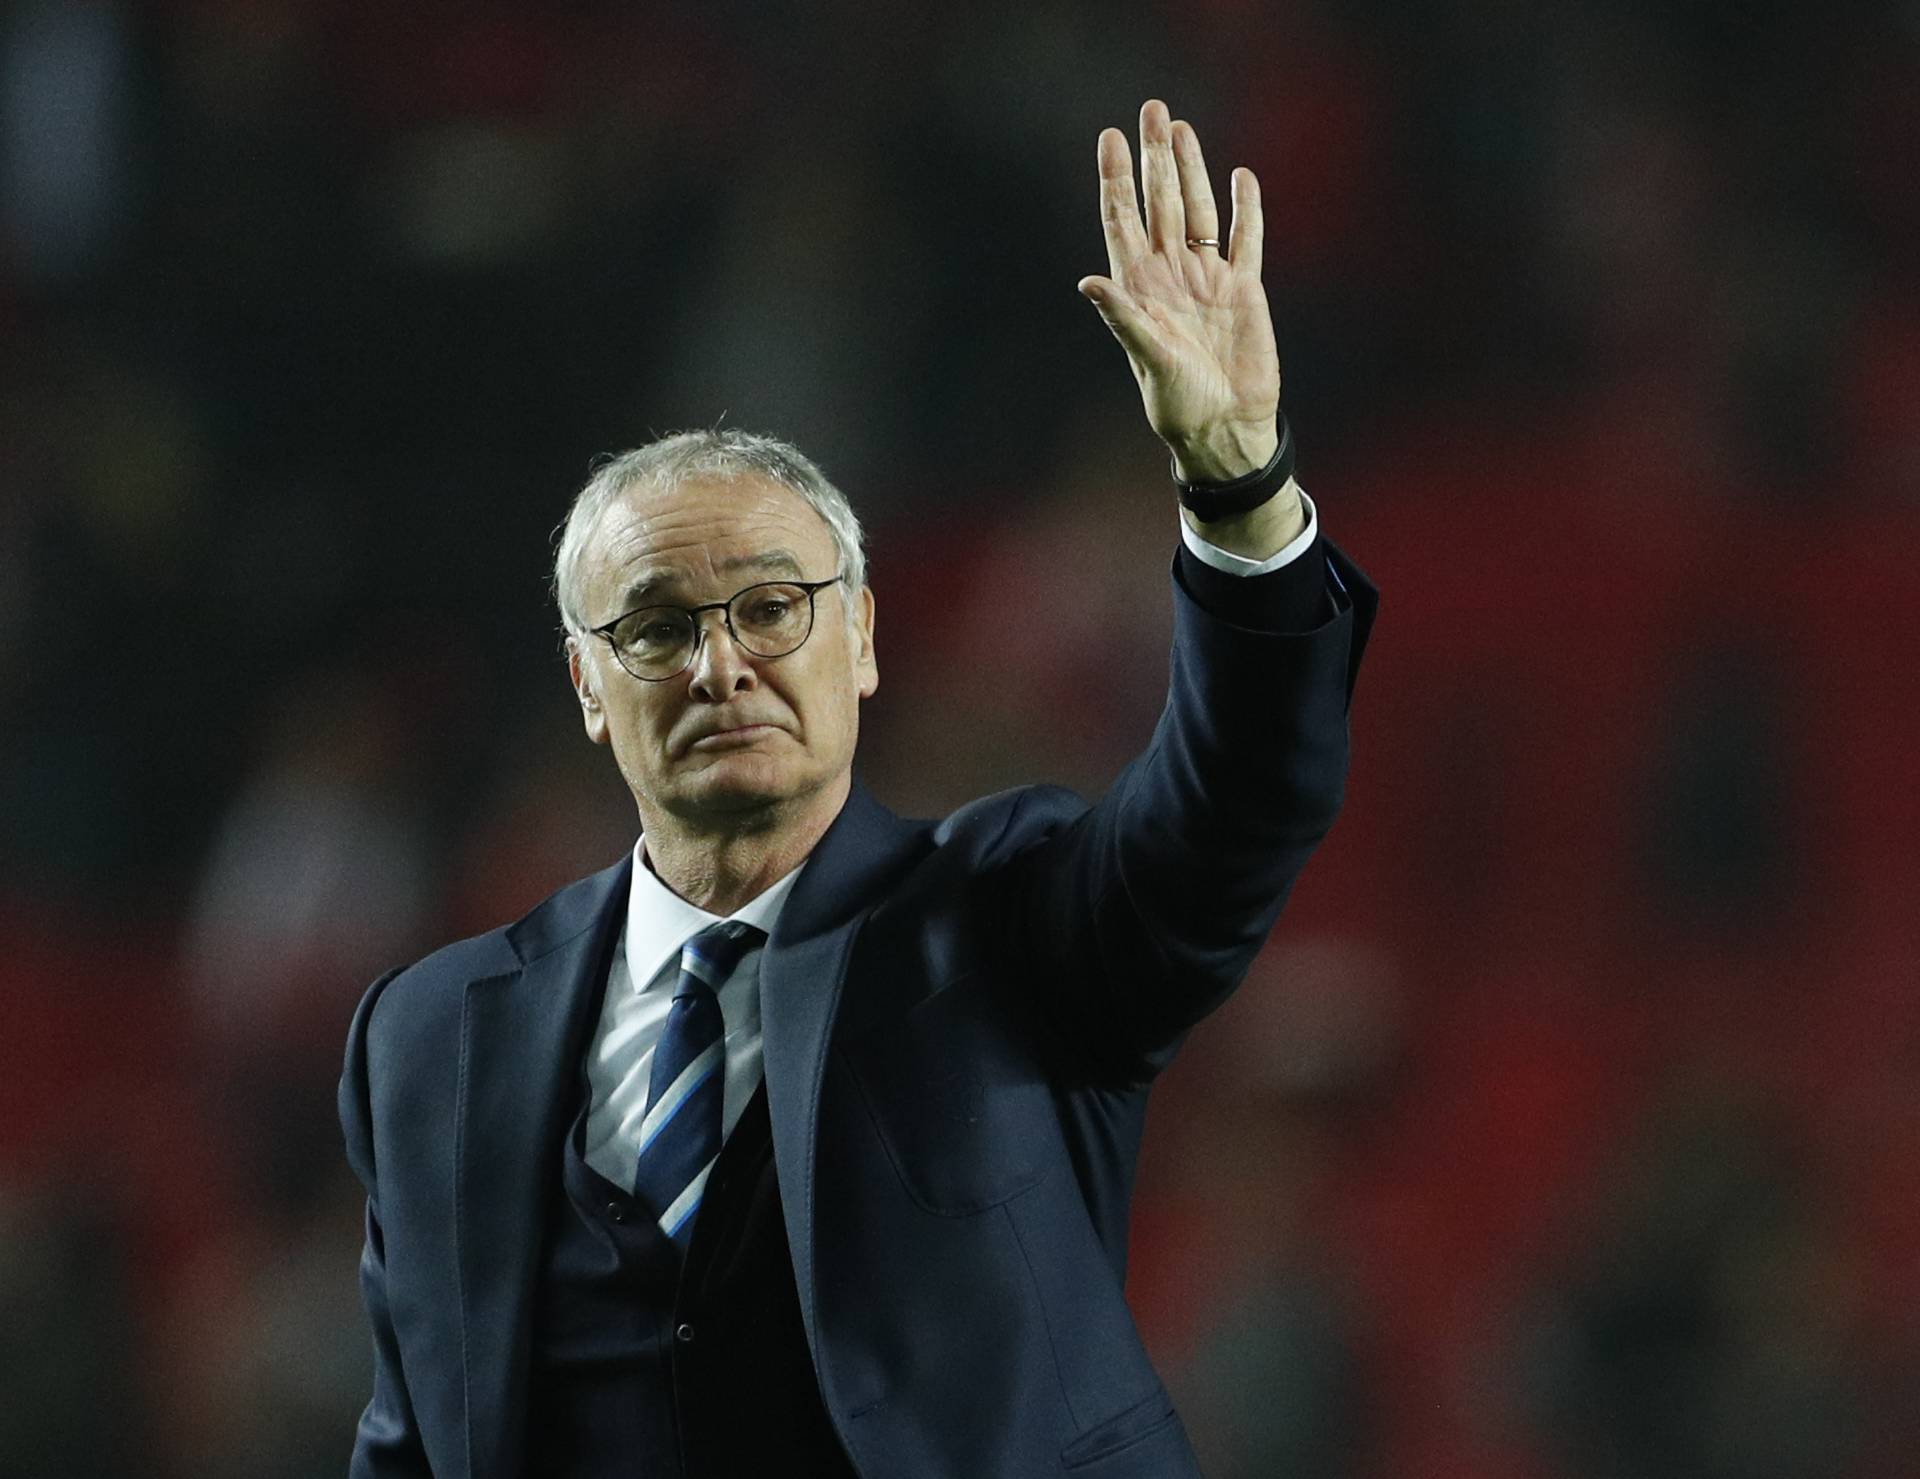 Leicester City manager Claudio Ranieri after the match